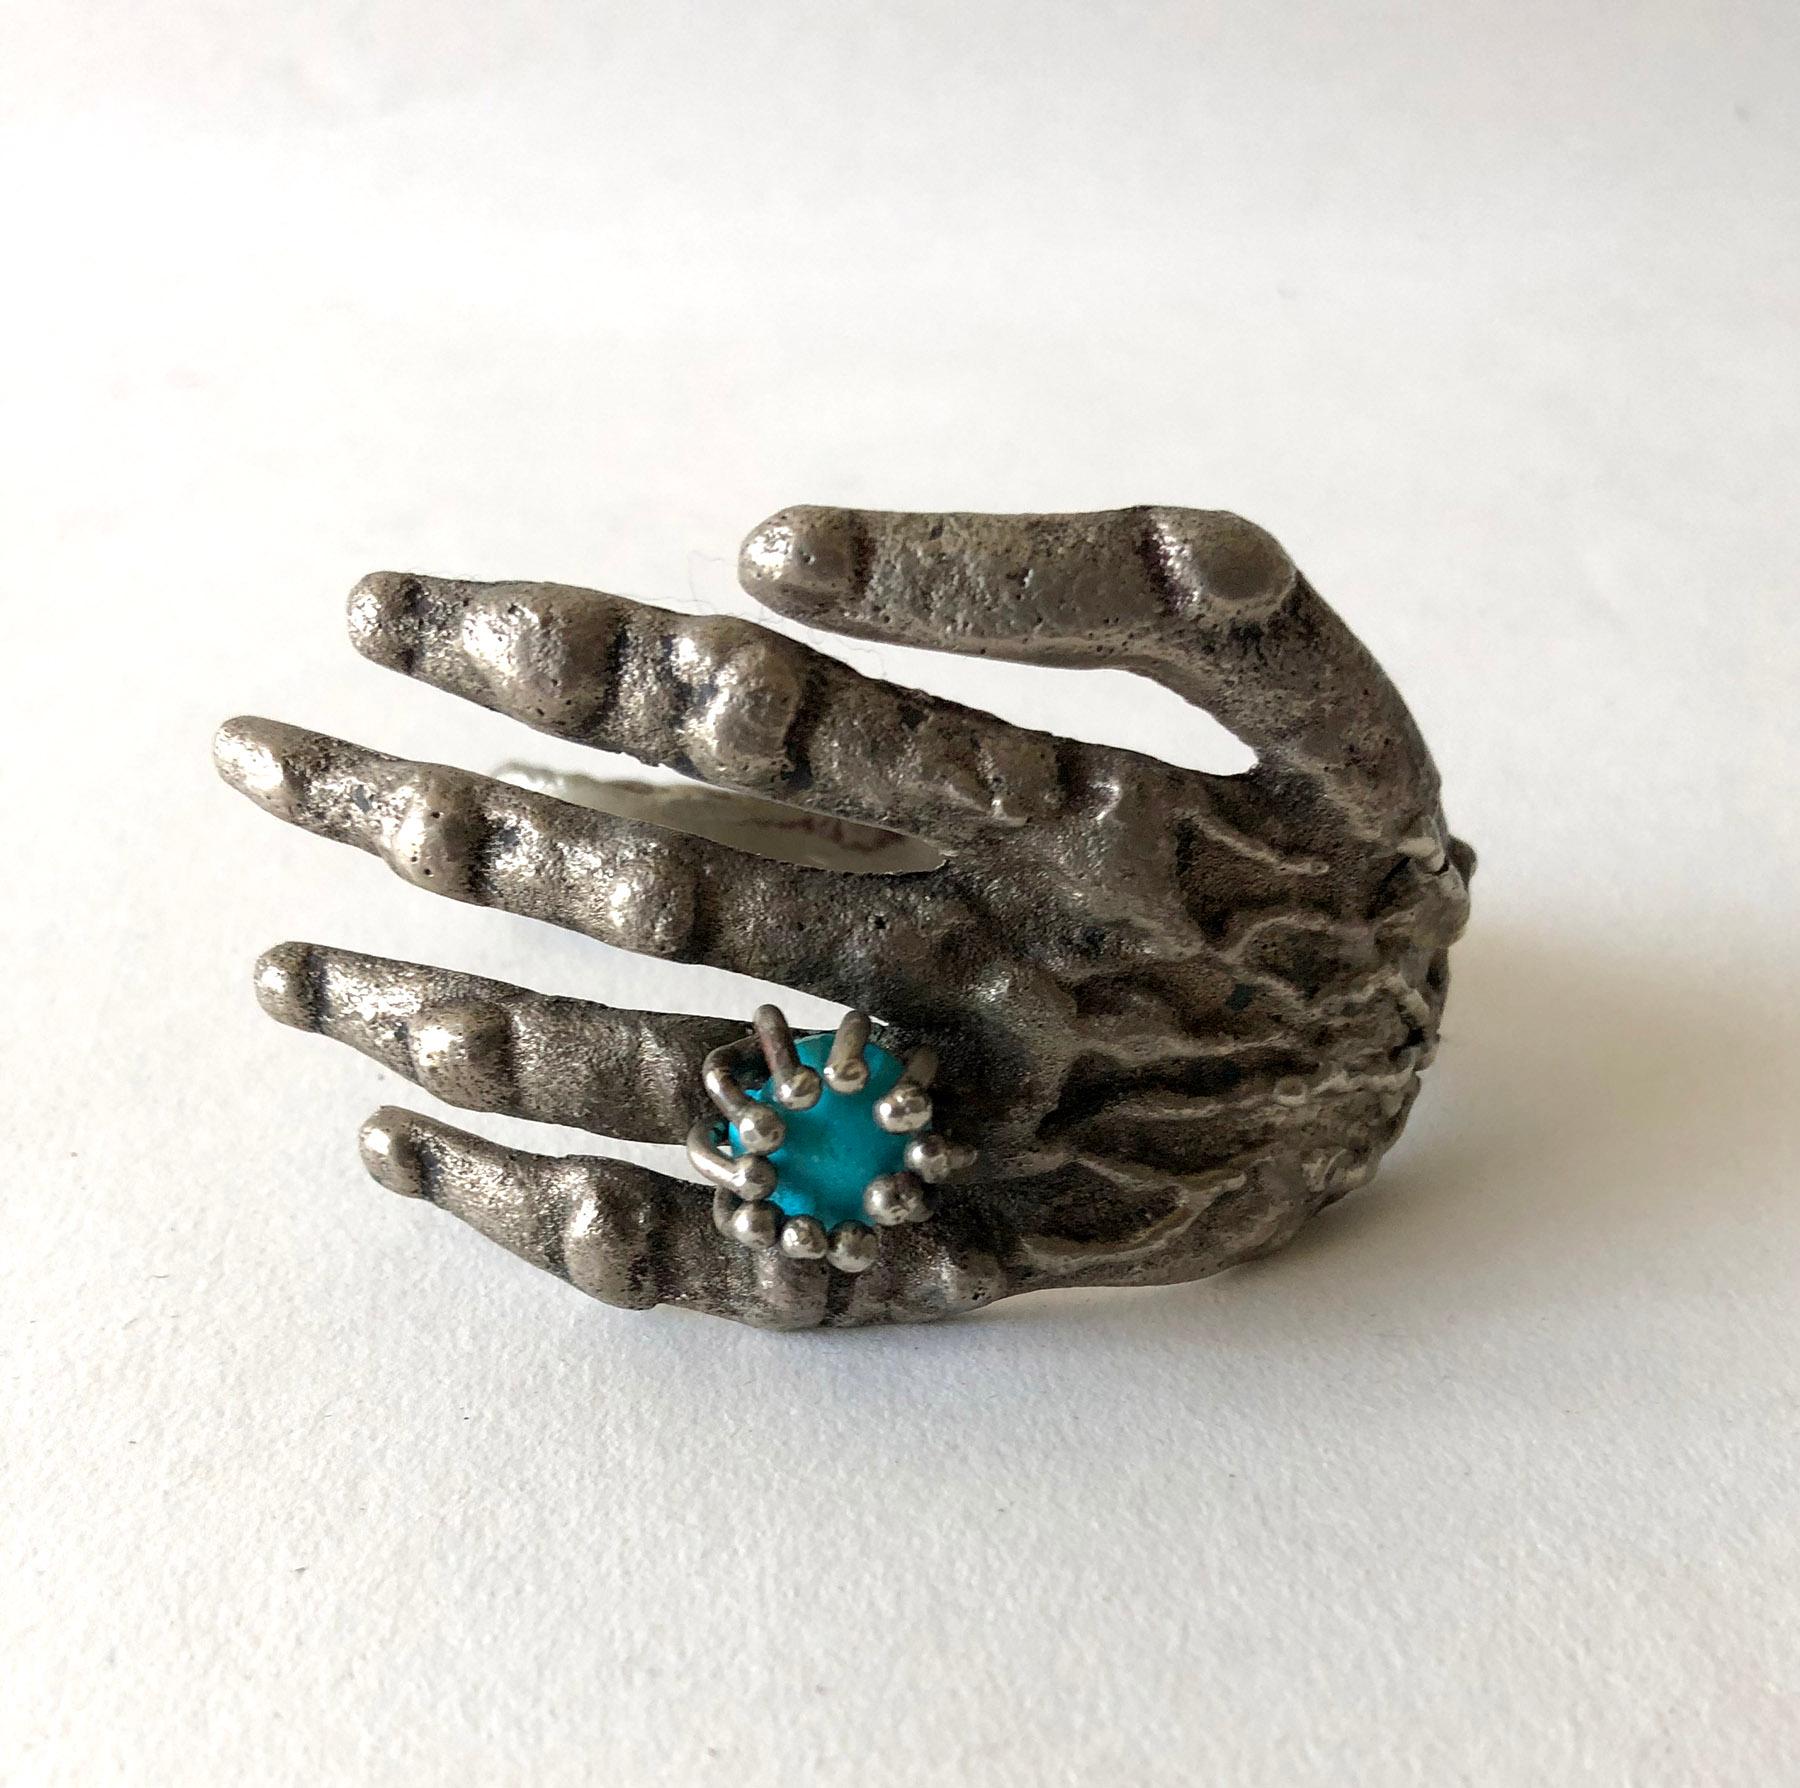 Surrealist bronze hand cuff bracelet with turquoise ring decoration created by Pal Kepenyes of Acapulco, Mexico.  Bracelet measures 2.5